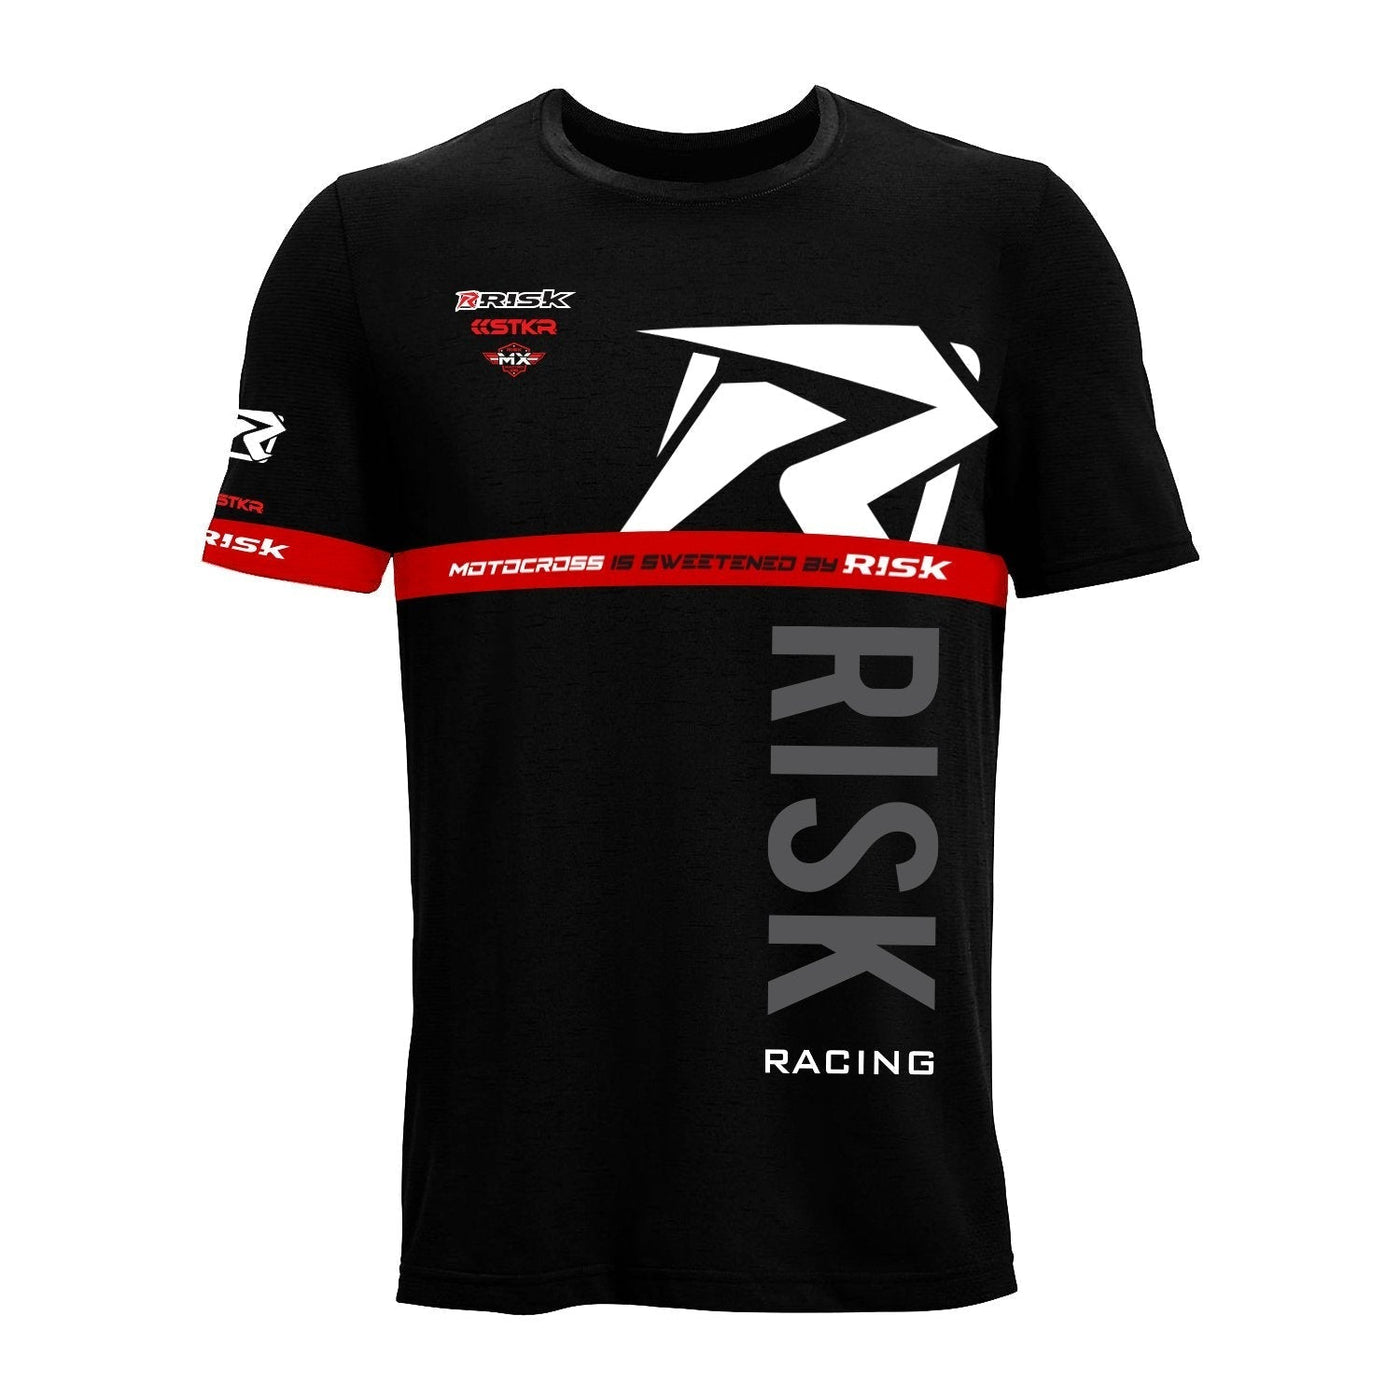 Risk Racing Premium Athletic T Shirt, Black / Red, Small